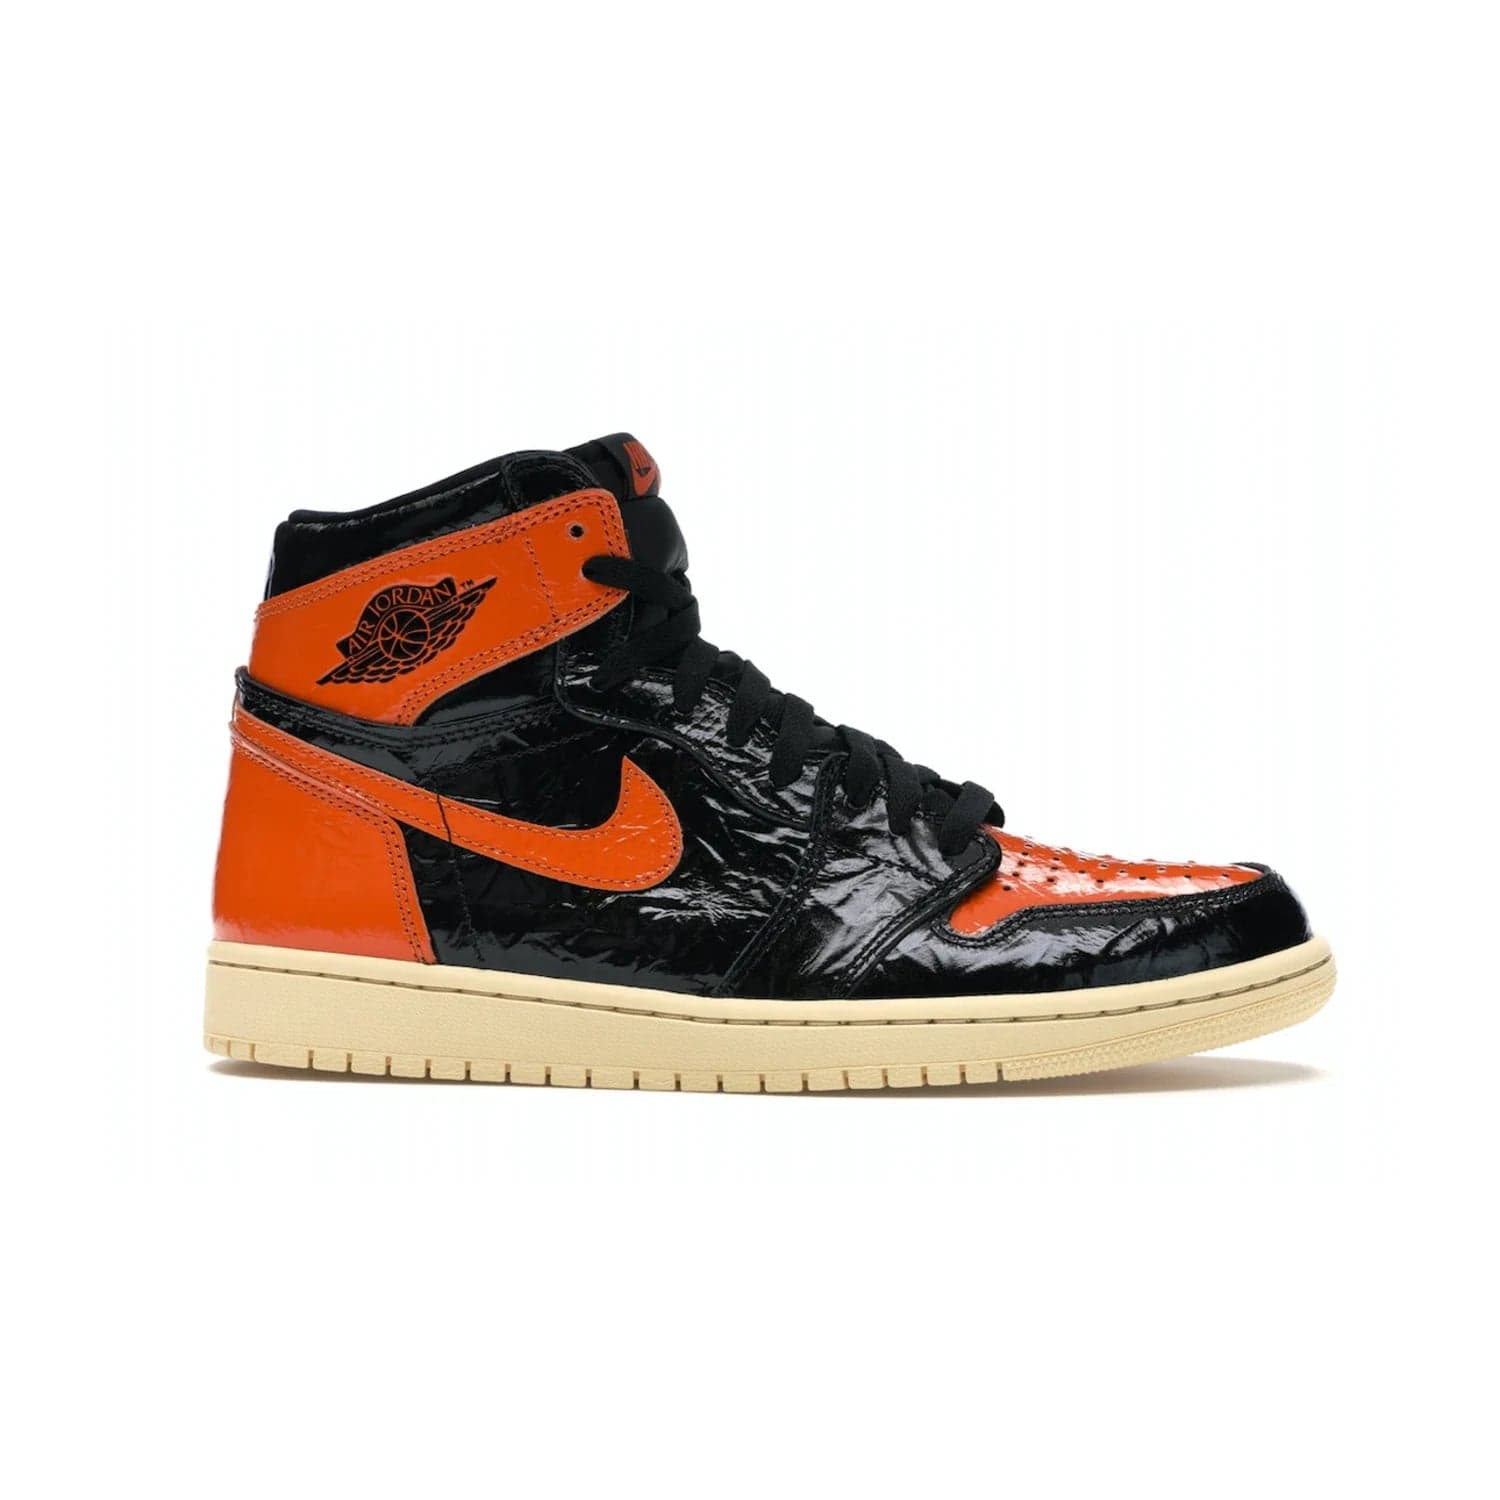 Jordan 1 Retro High Shattered Backboard 3.0 - Image 2 - Only at www.BallersClubKickz.com - #
Jordan 1 Retro High Shattered Backboard 3.0: the perfect blend of modern style and nostalgic flair featuring an orange and black crinkled patent leather upper and yellowed vanilla outsole. Get these exclusive sneakers released in October of 2019!